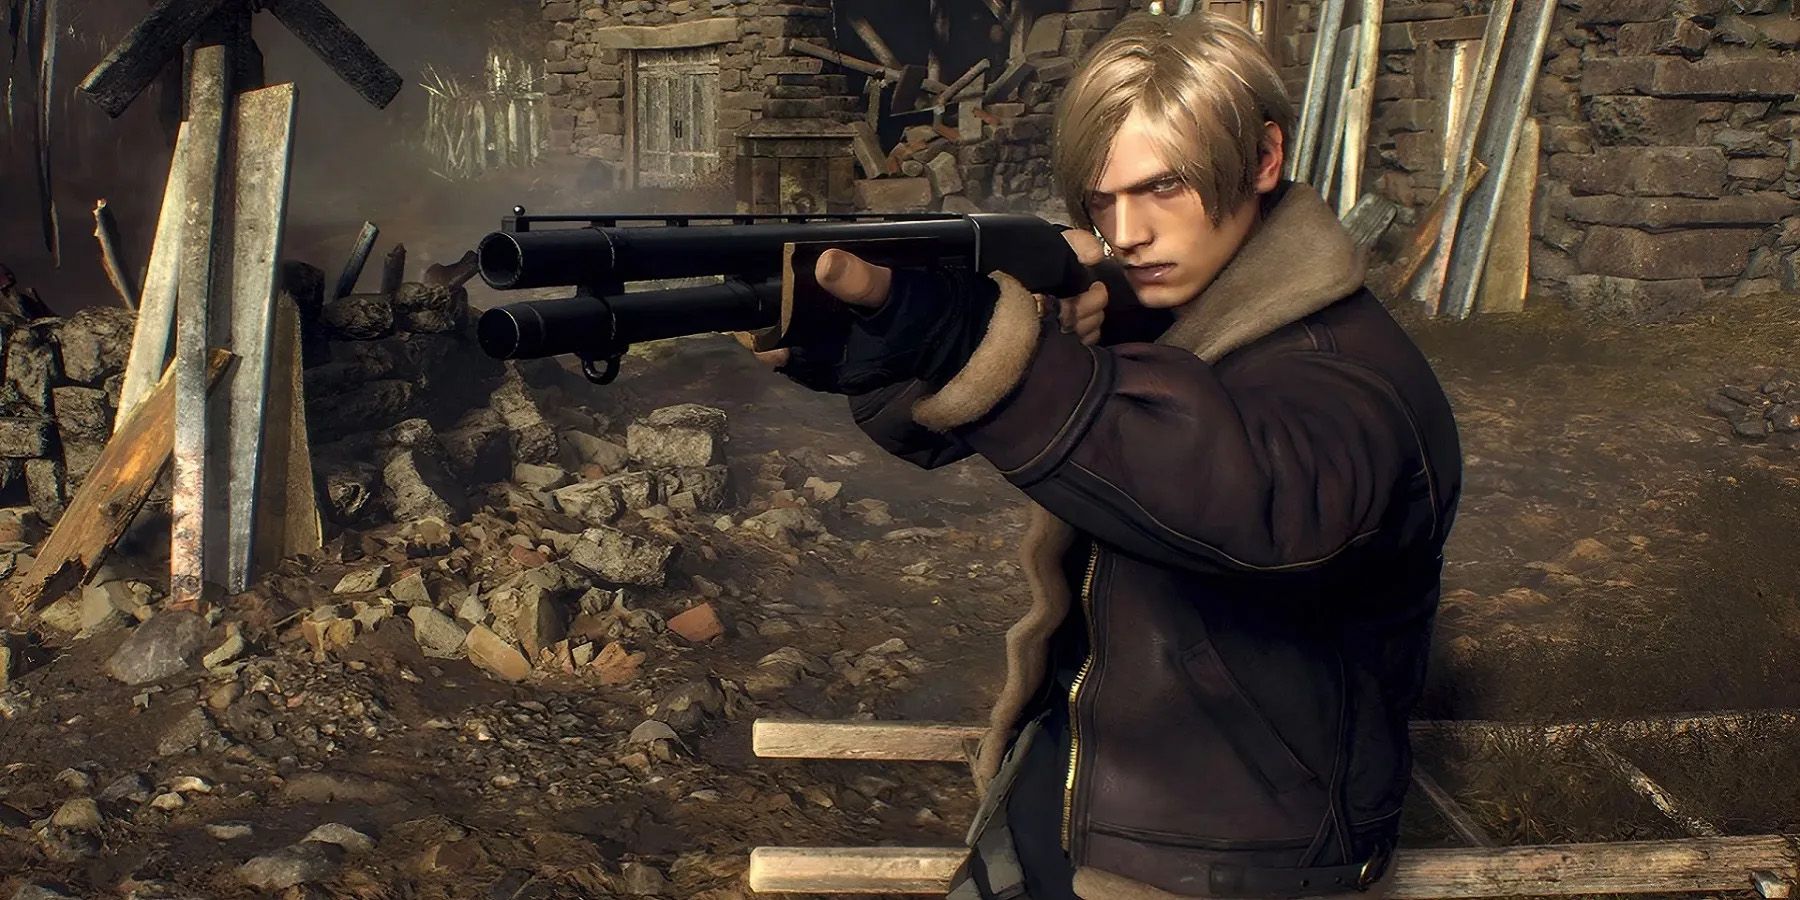 All weapons in Resident Evil 4 Remake & how to get them - Charlie